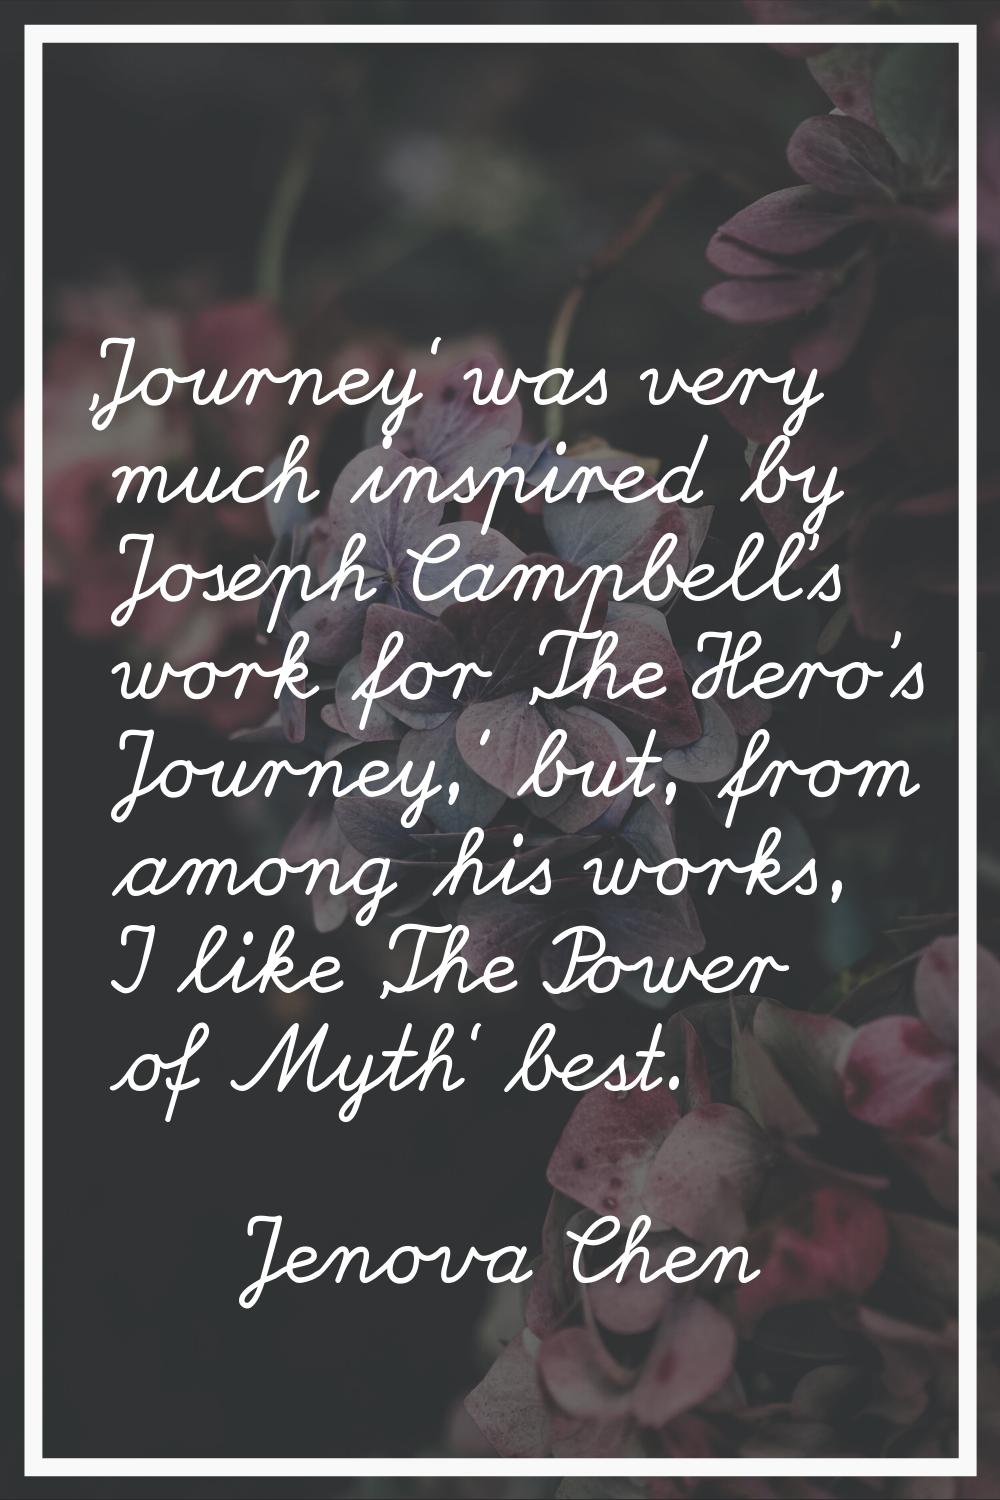 'Journey' was very much inspired by Joseph Campbell's work for 'The Hero's Journey,' but, from amon